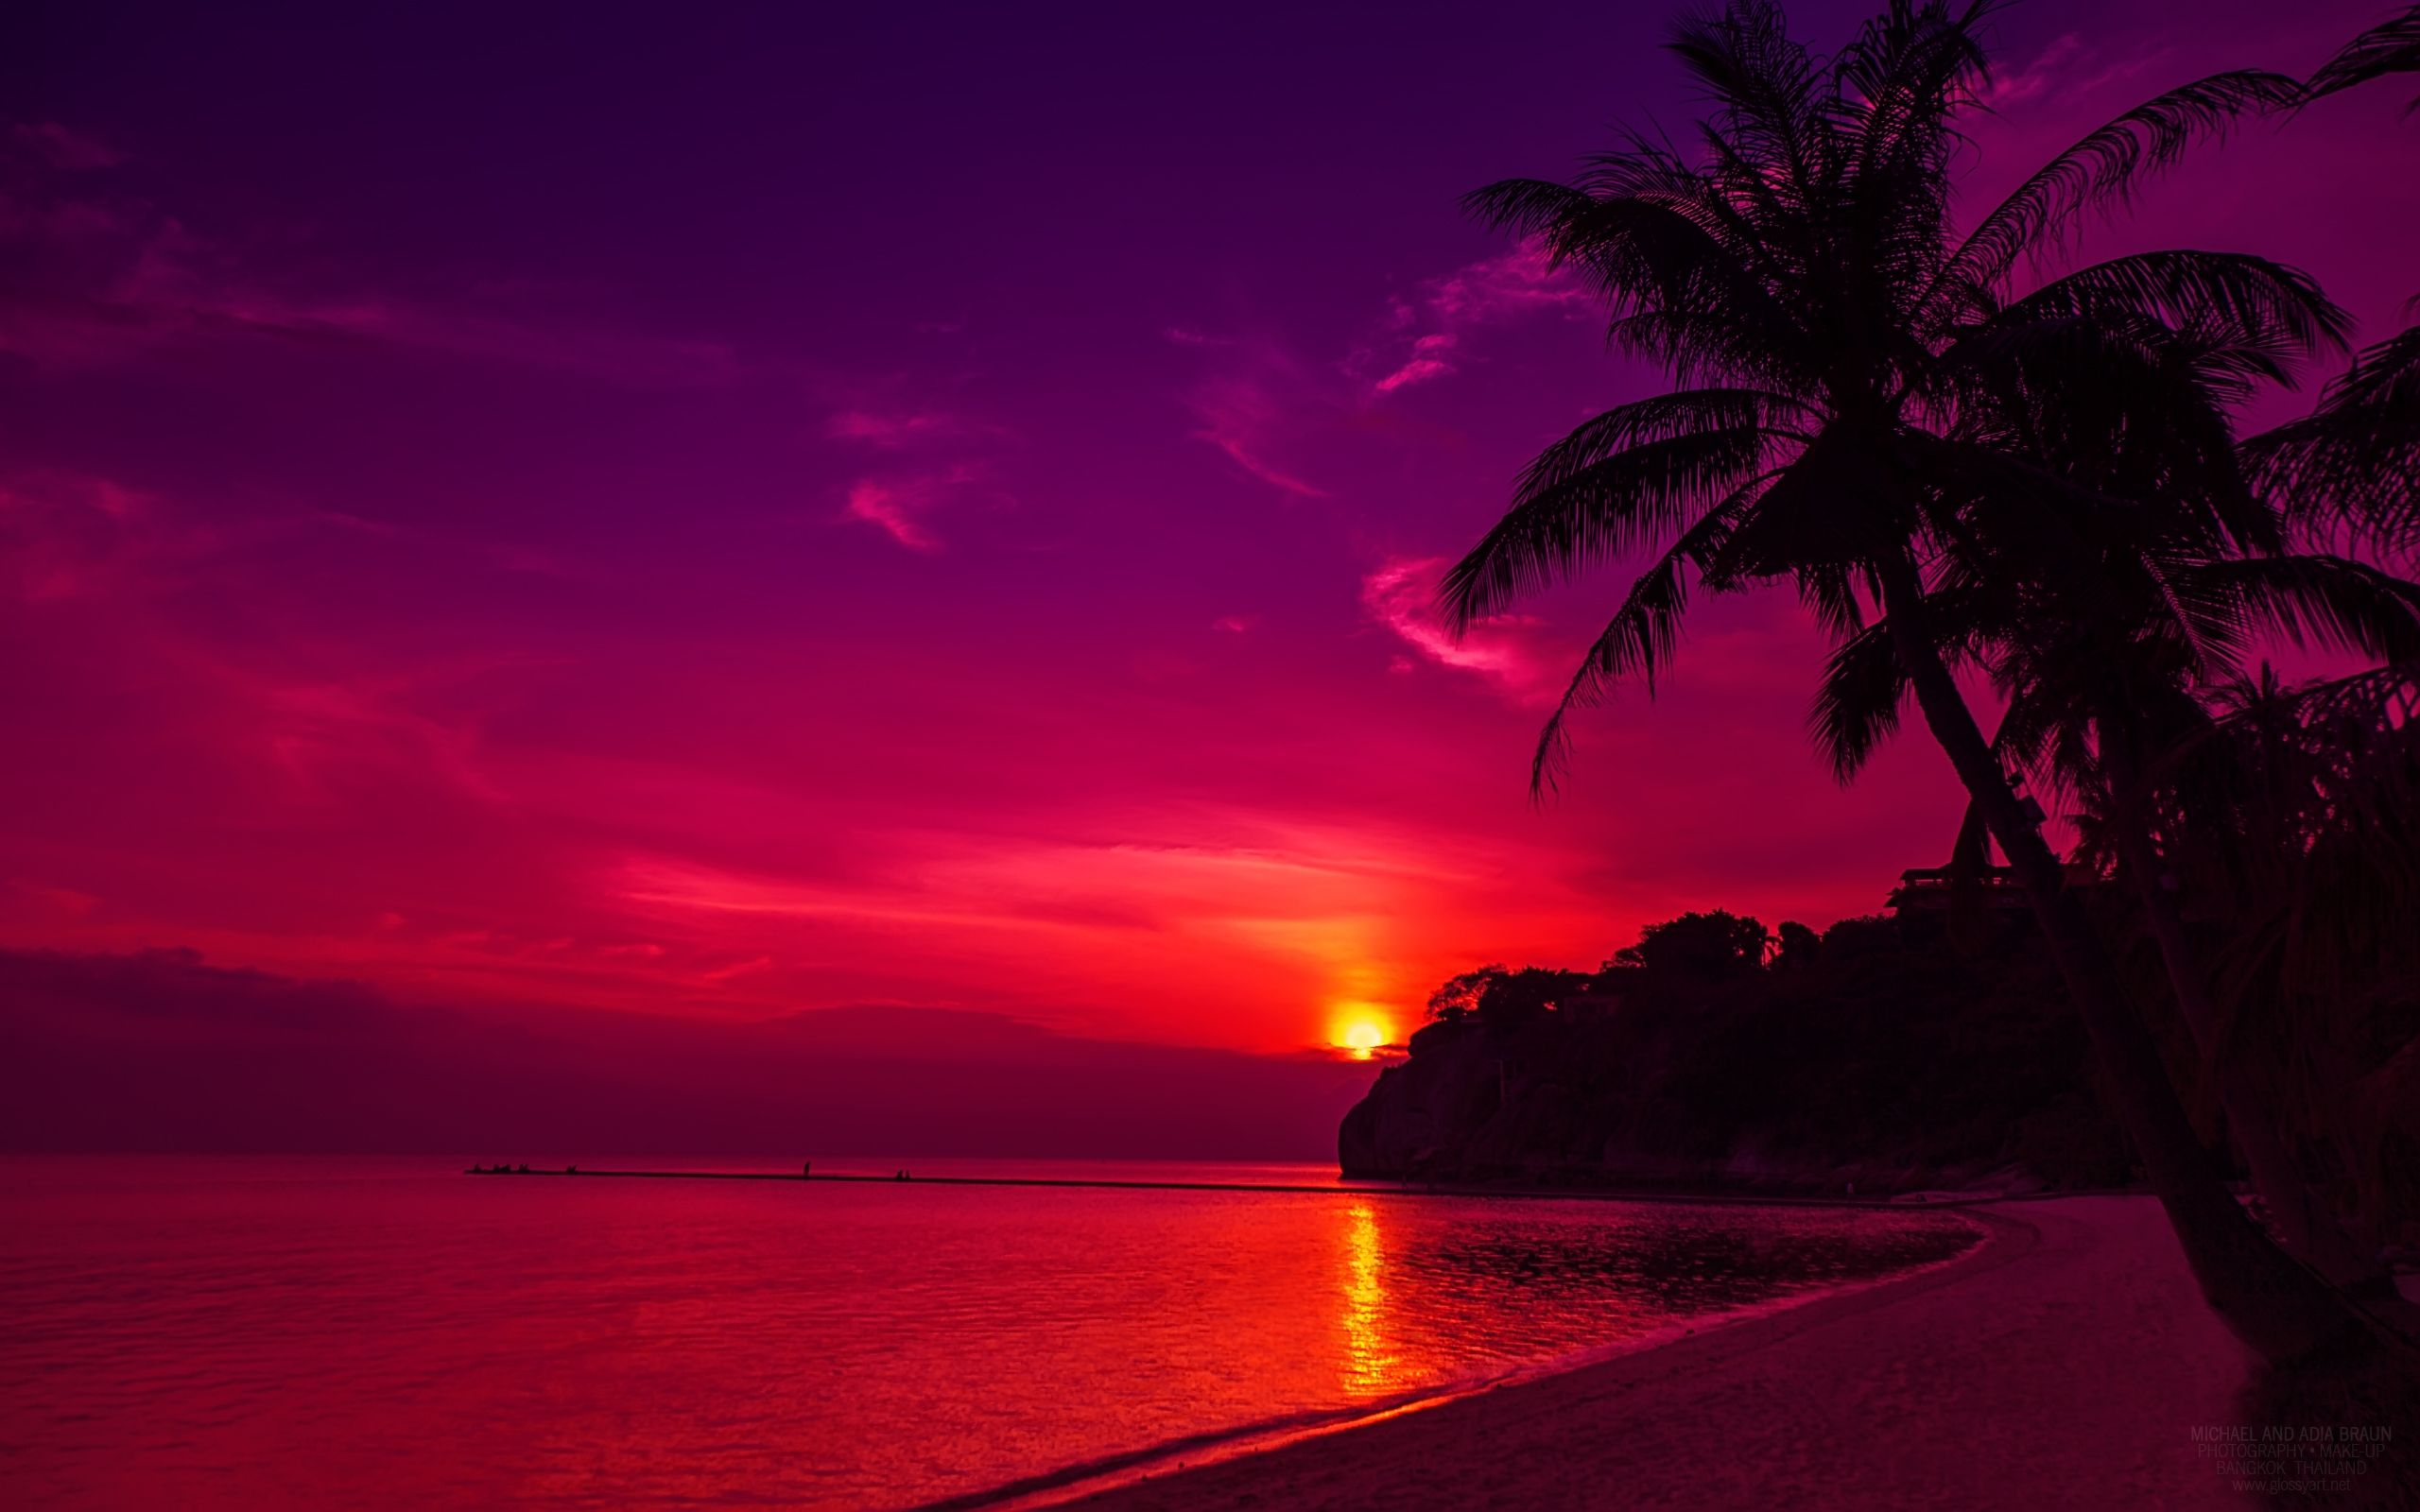 2560x1600 Wallpapers Tagged With SUNSET | SUNSET HD Wallpapers | Page 1 | Beach sunset wallpaper, Beach sunset images, Sunset pictures